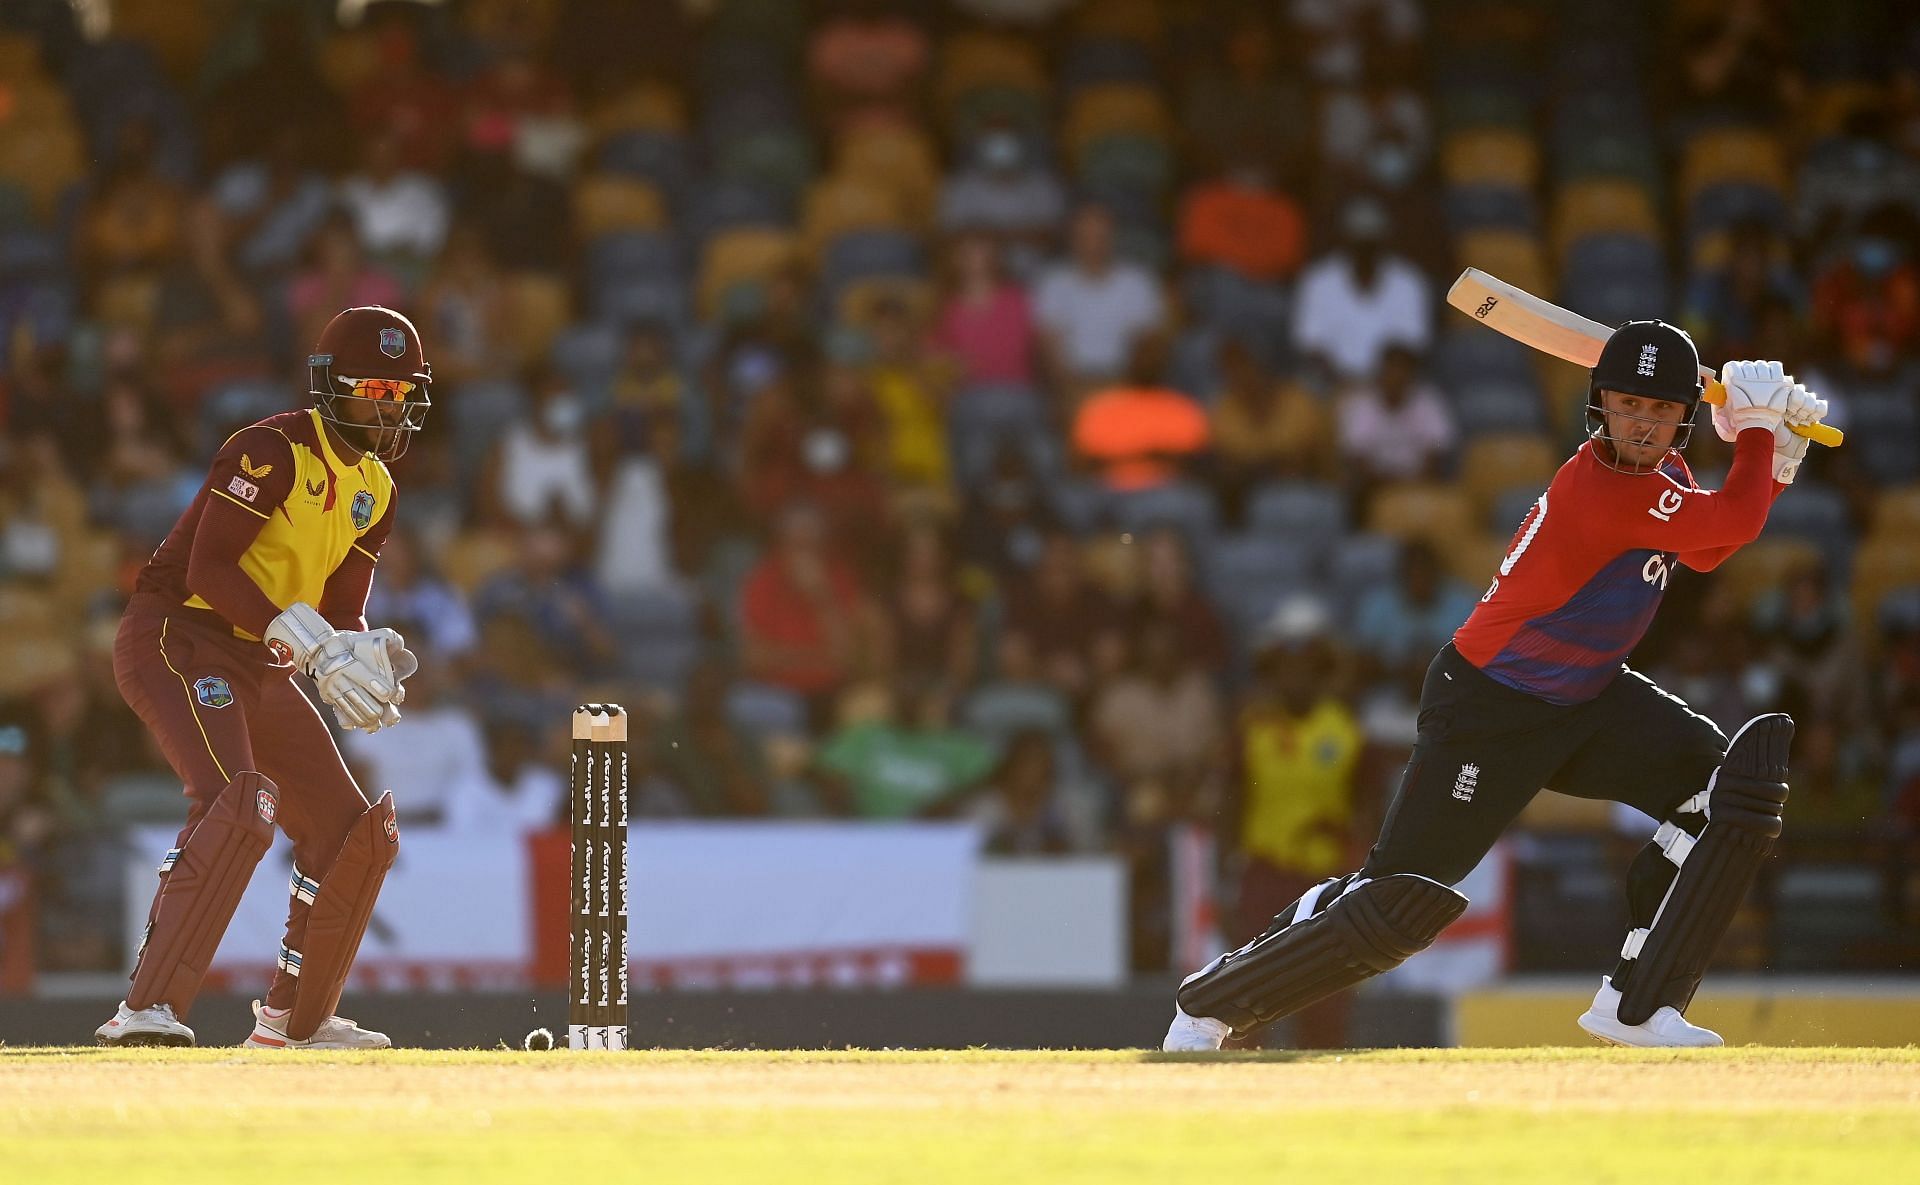 Jason Roy can be an excellent addition to the Ahmedabad-based IPL franchise